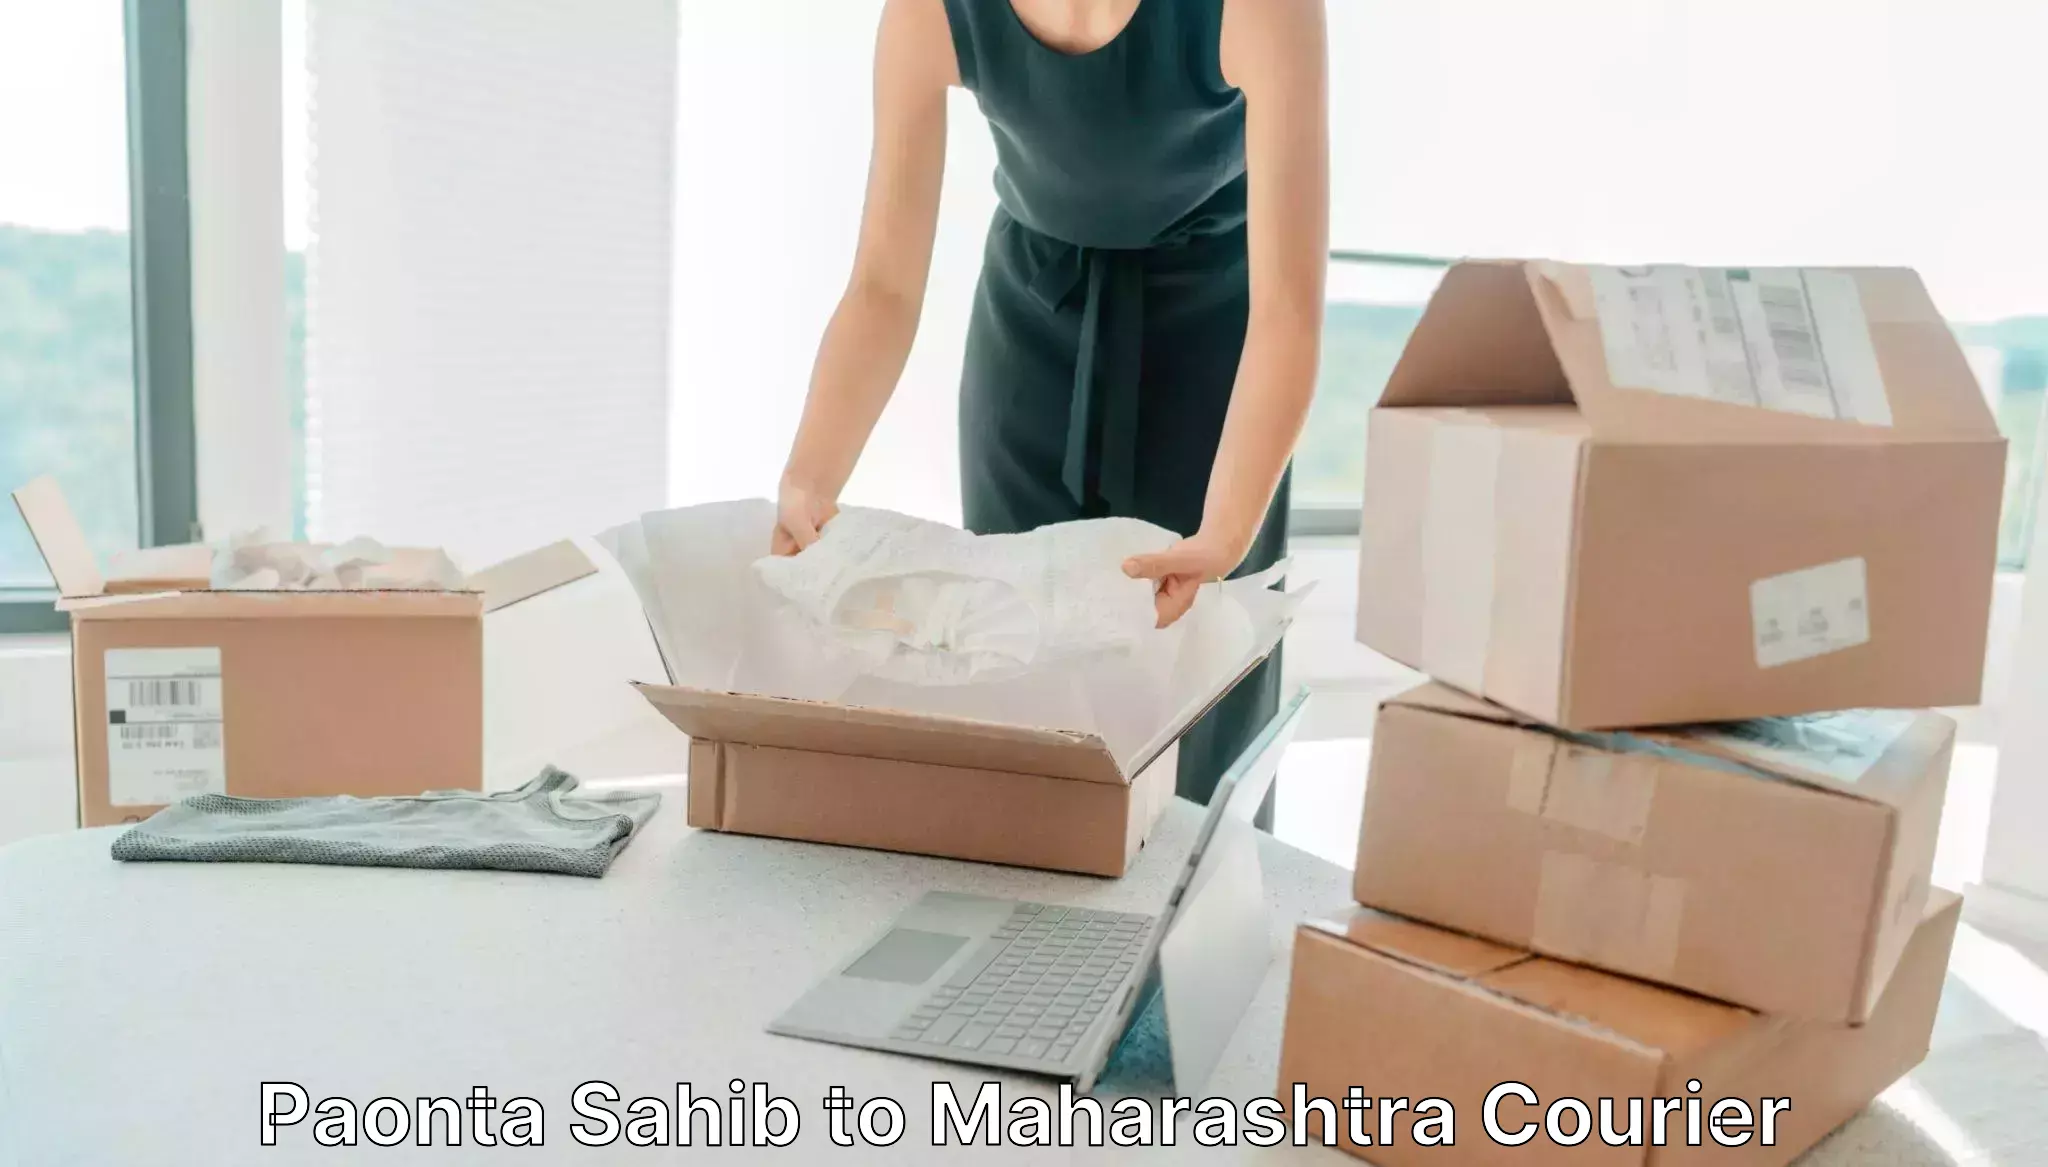 Multi-national courier services Paonta Sahib to Bhandara